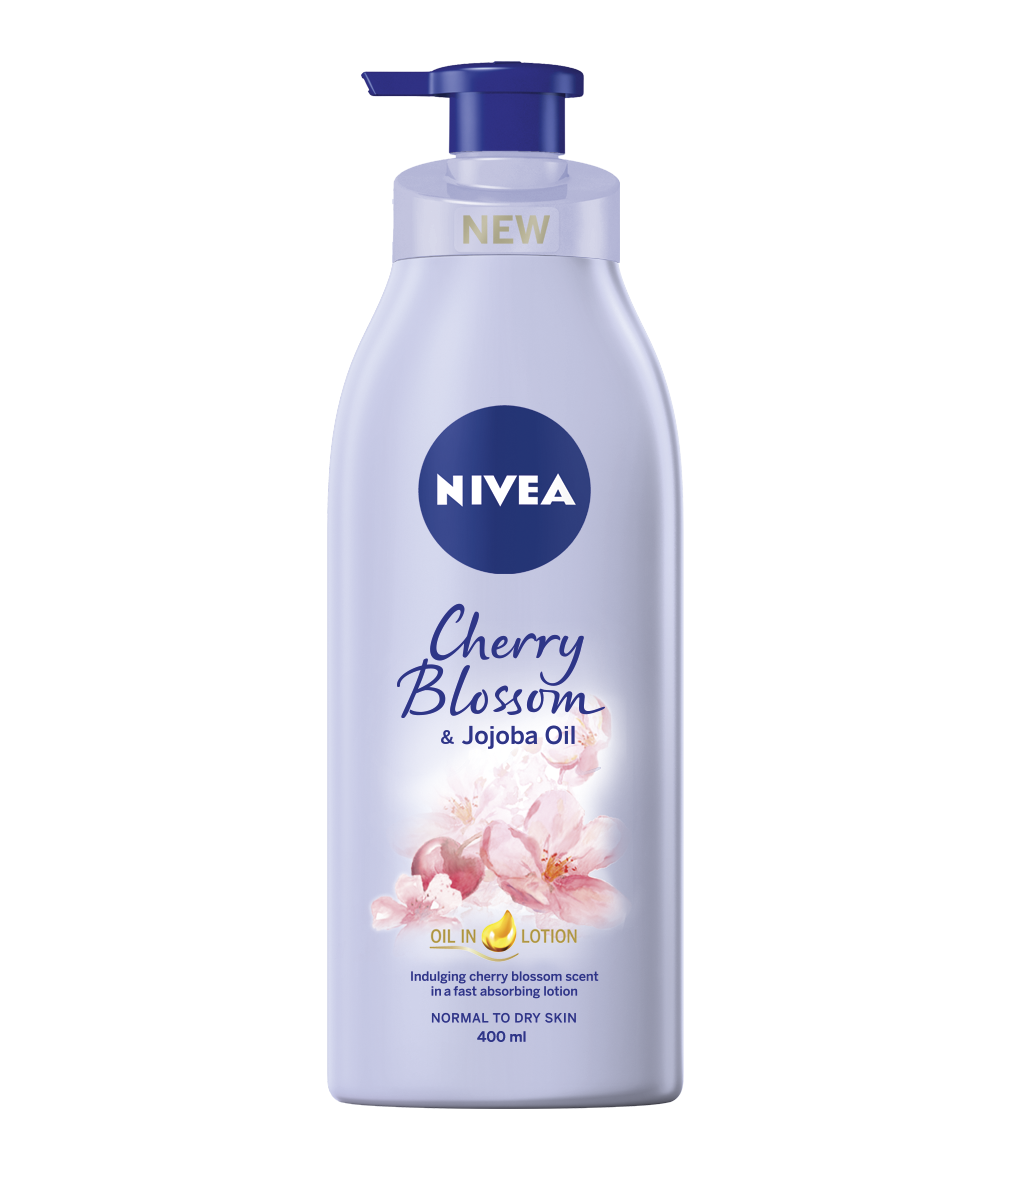 Lotion bottle png. Nivea oil in cherry